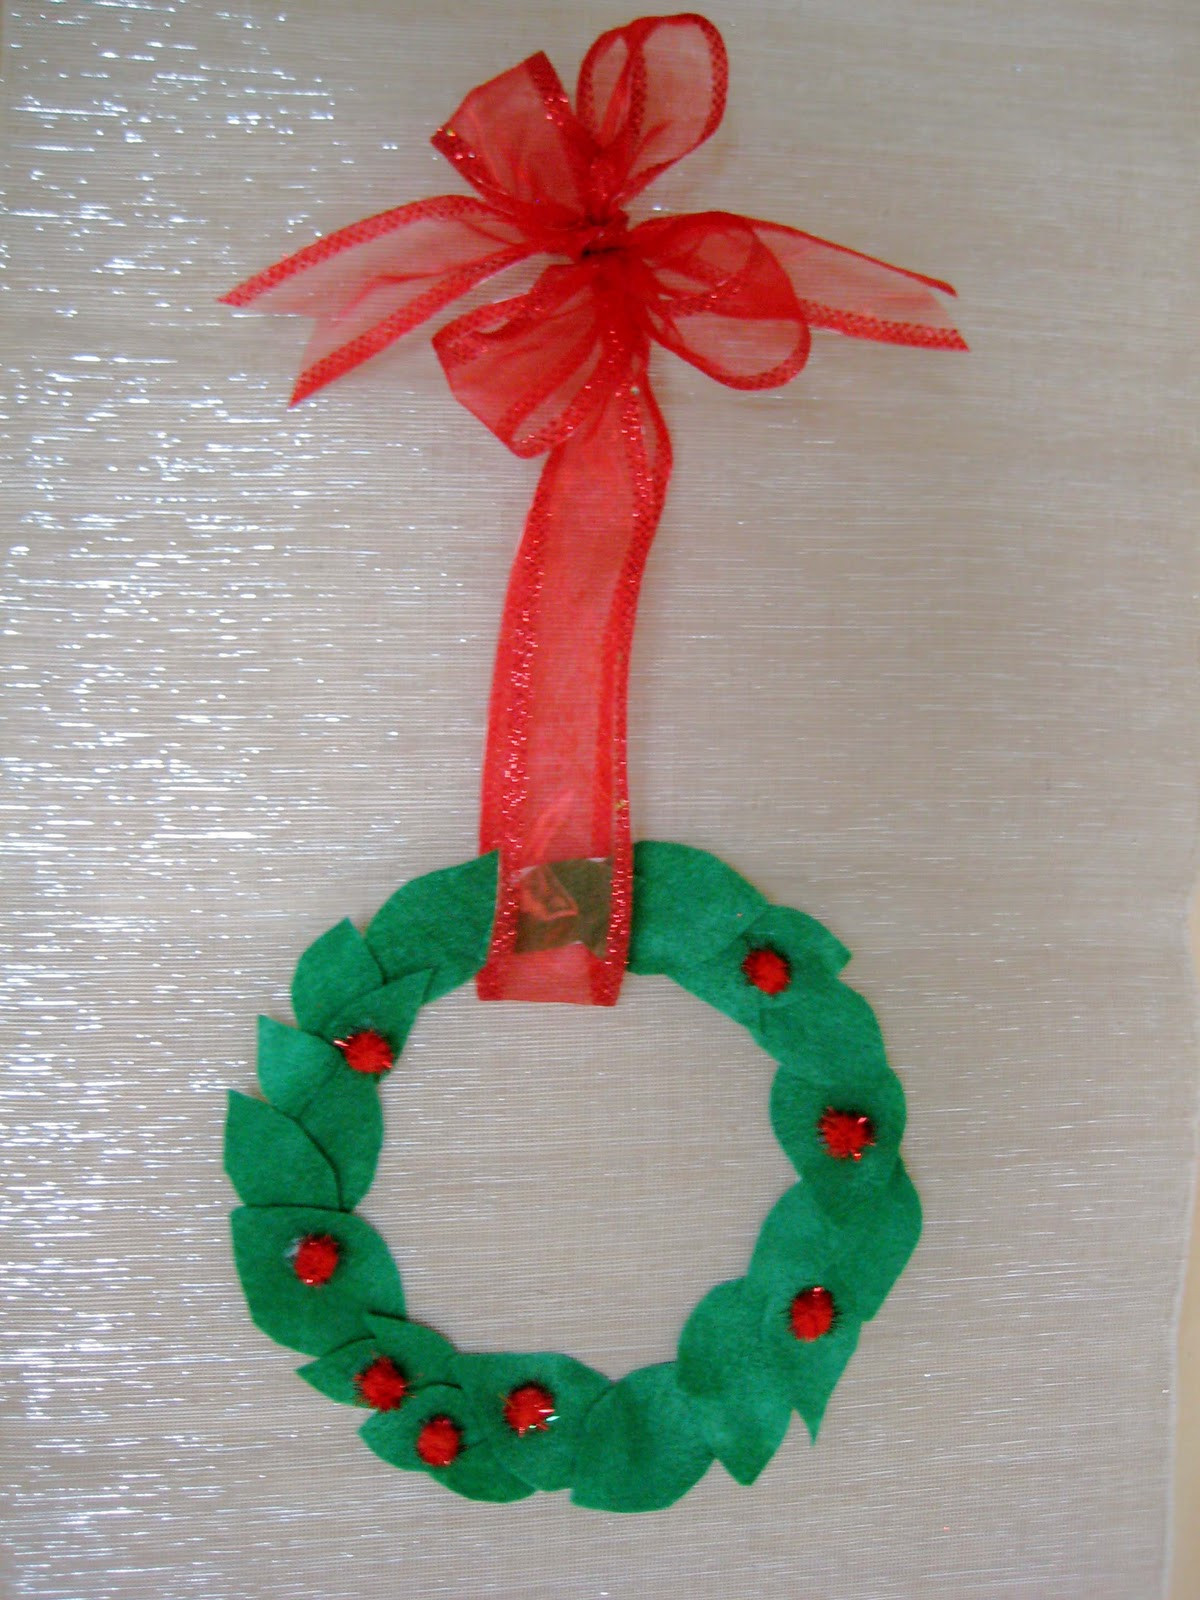 Wreath Craft For Kids
 4 Crazy Kings Christmas Kids Craft Simple Wreath